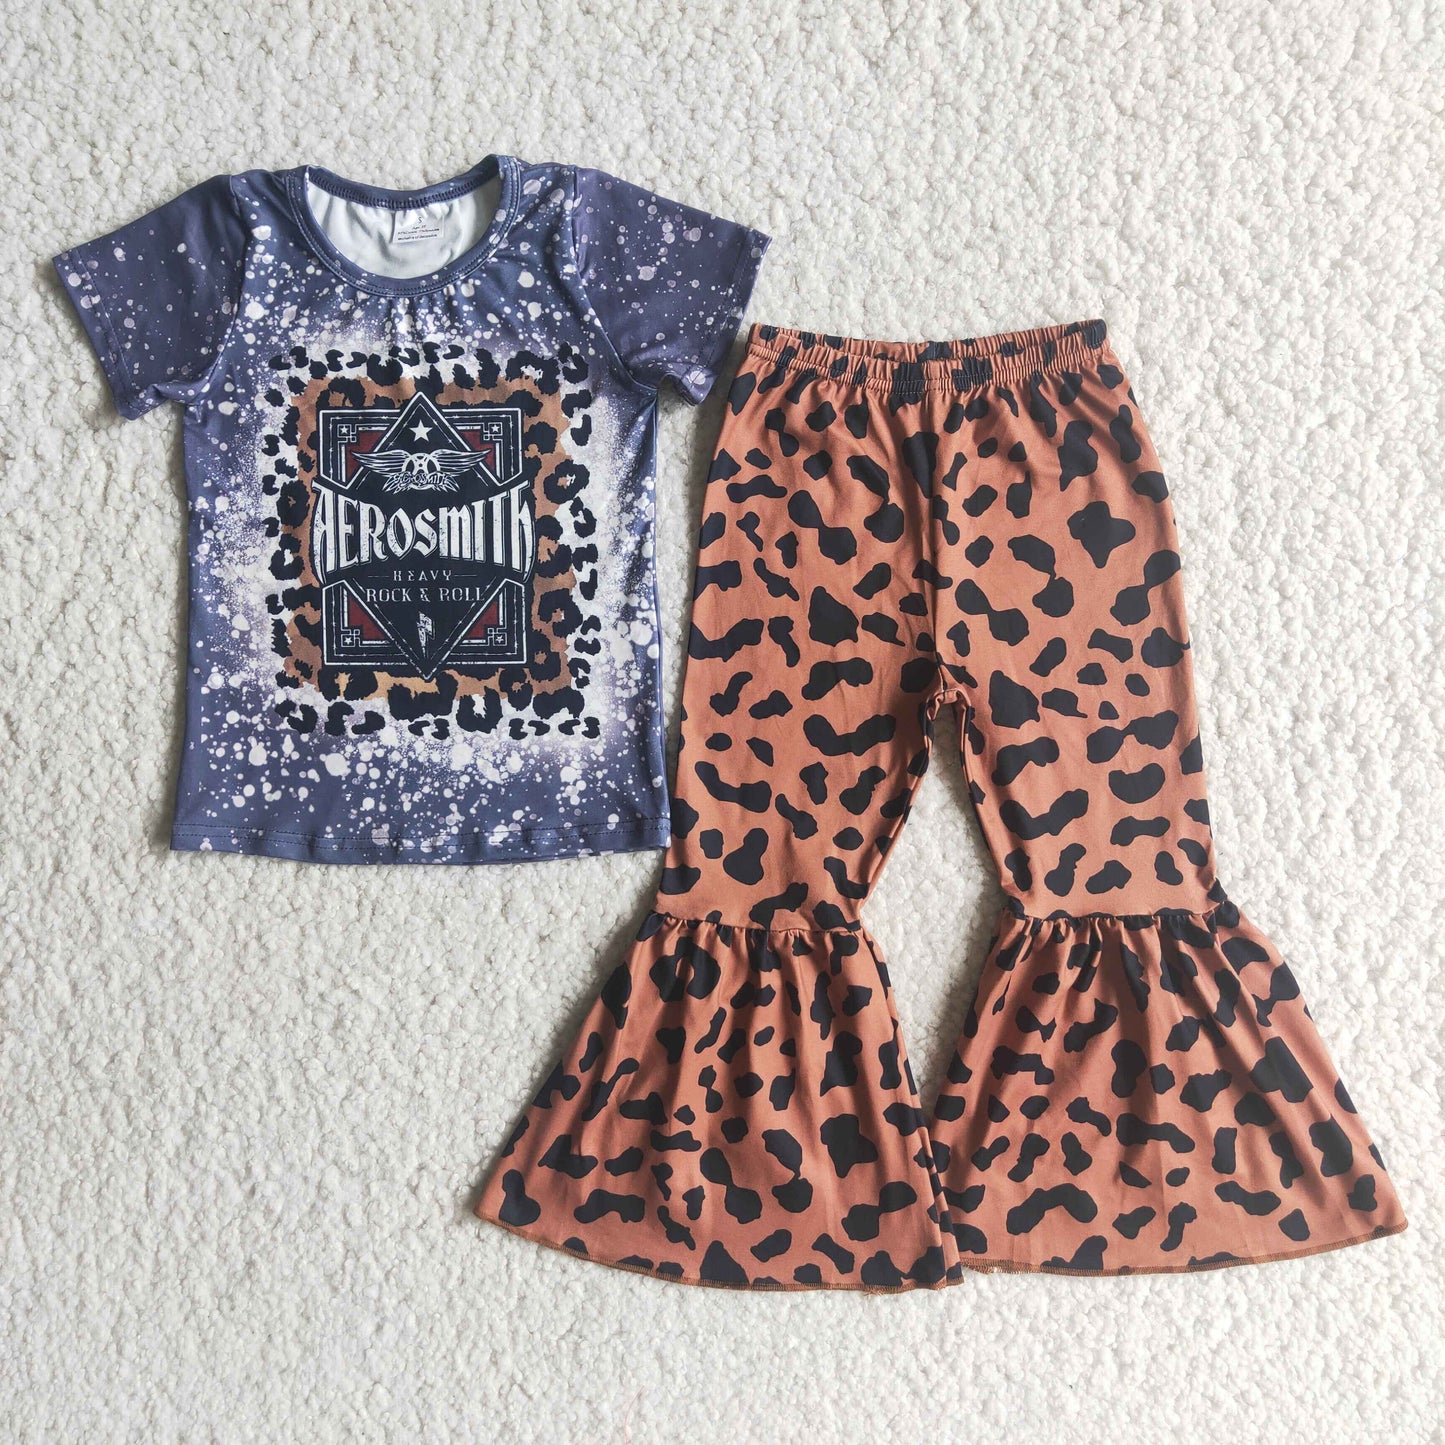 Gray bleached shirt leopard pants girls outfits